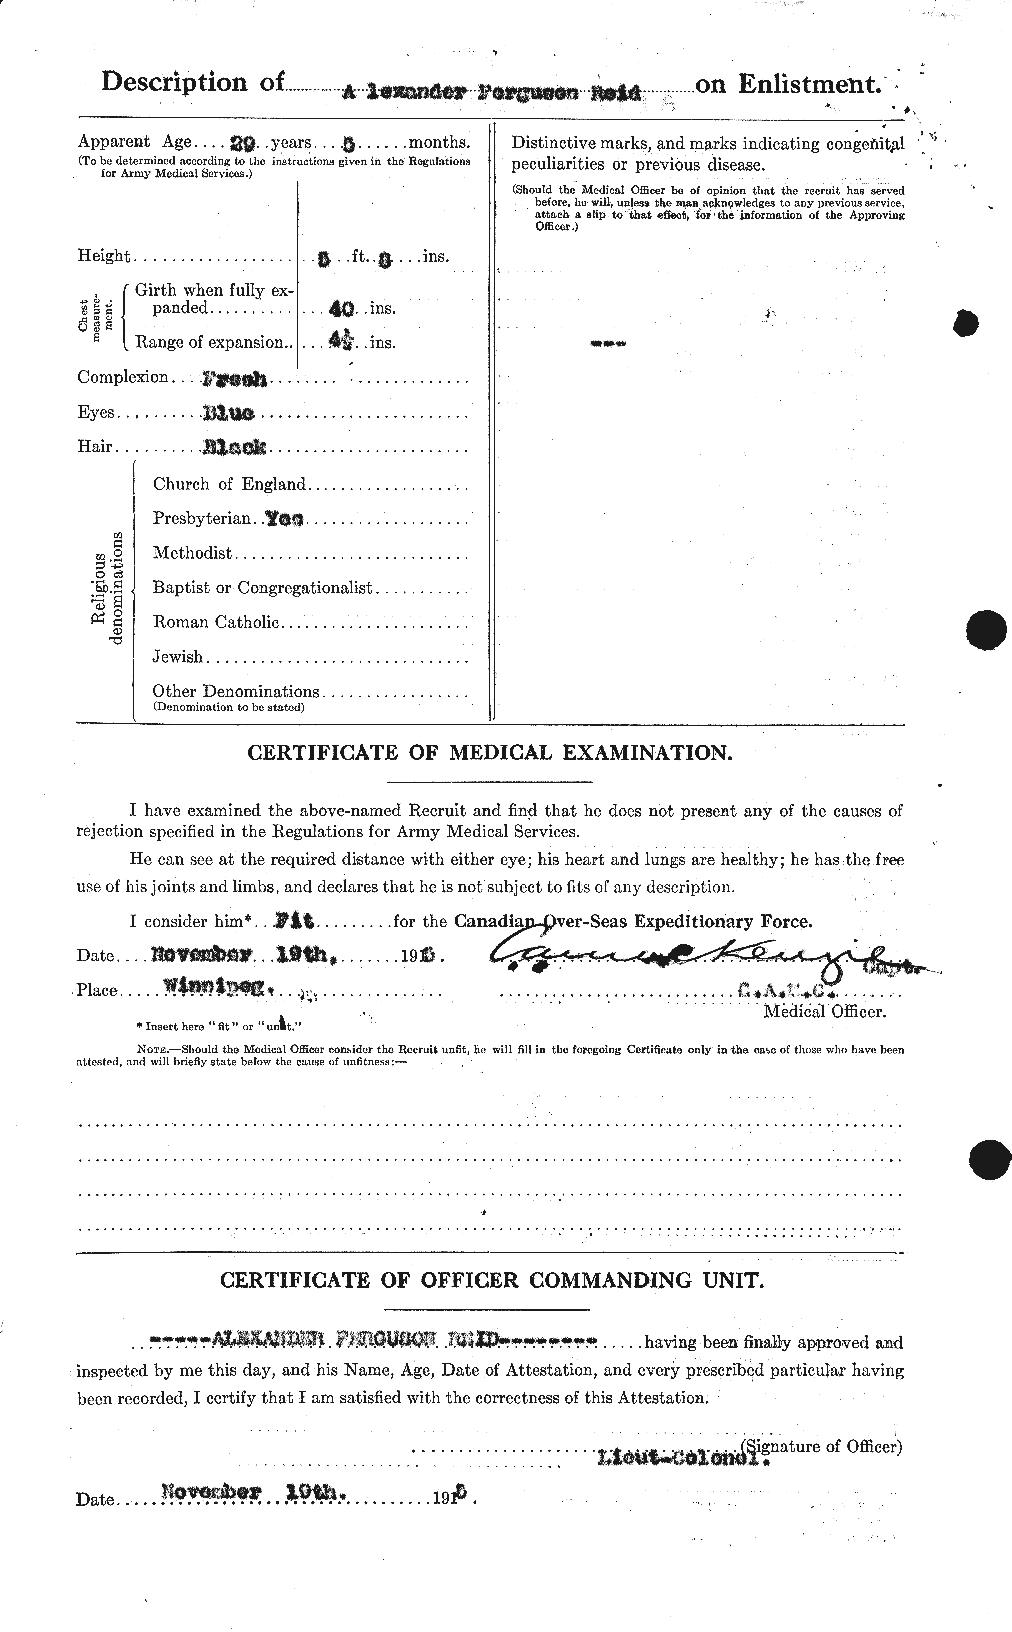 Personnel Records of the First World War - CEF 597778b